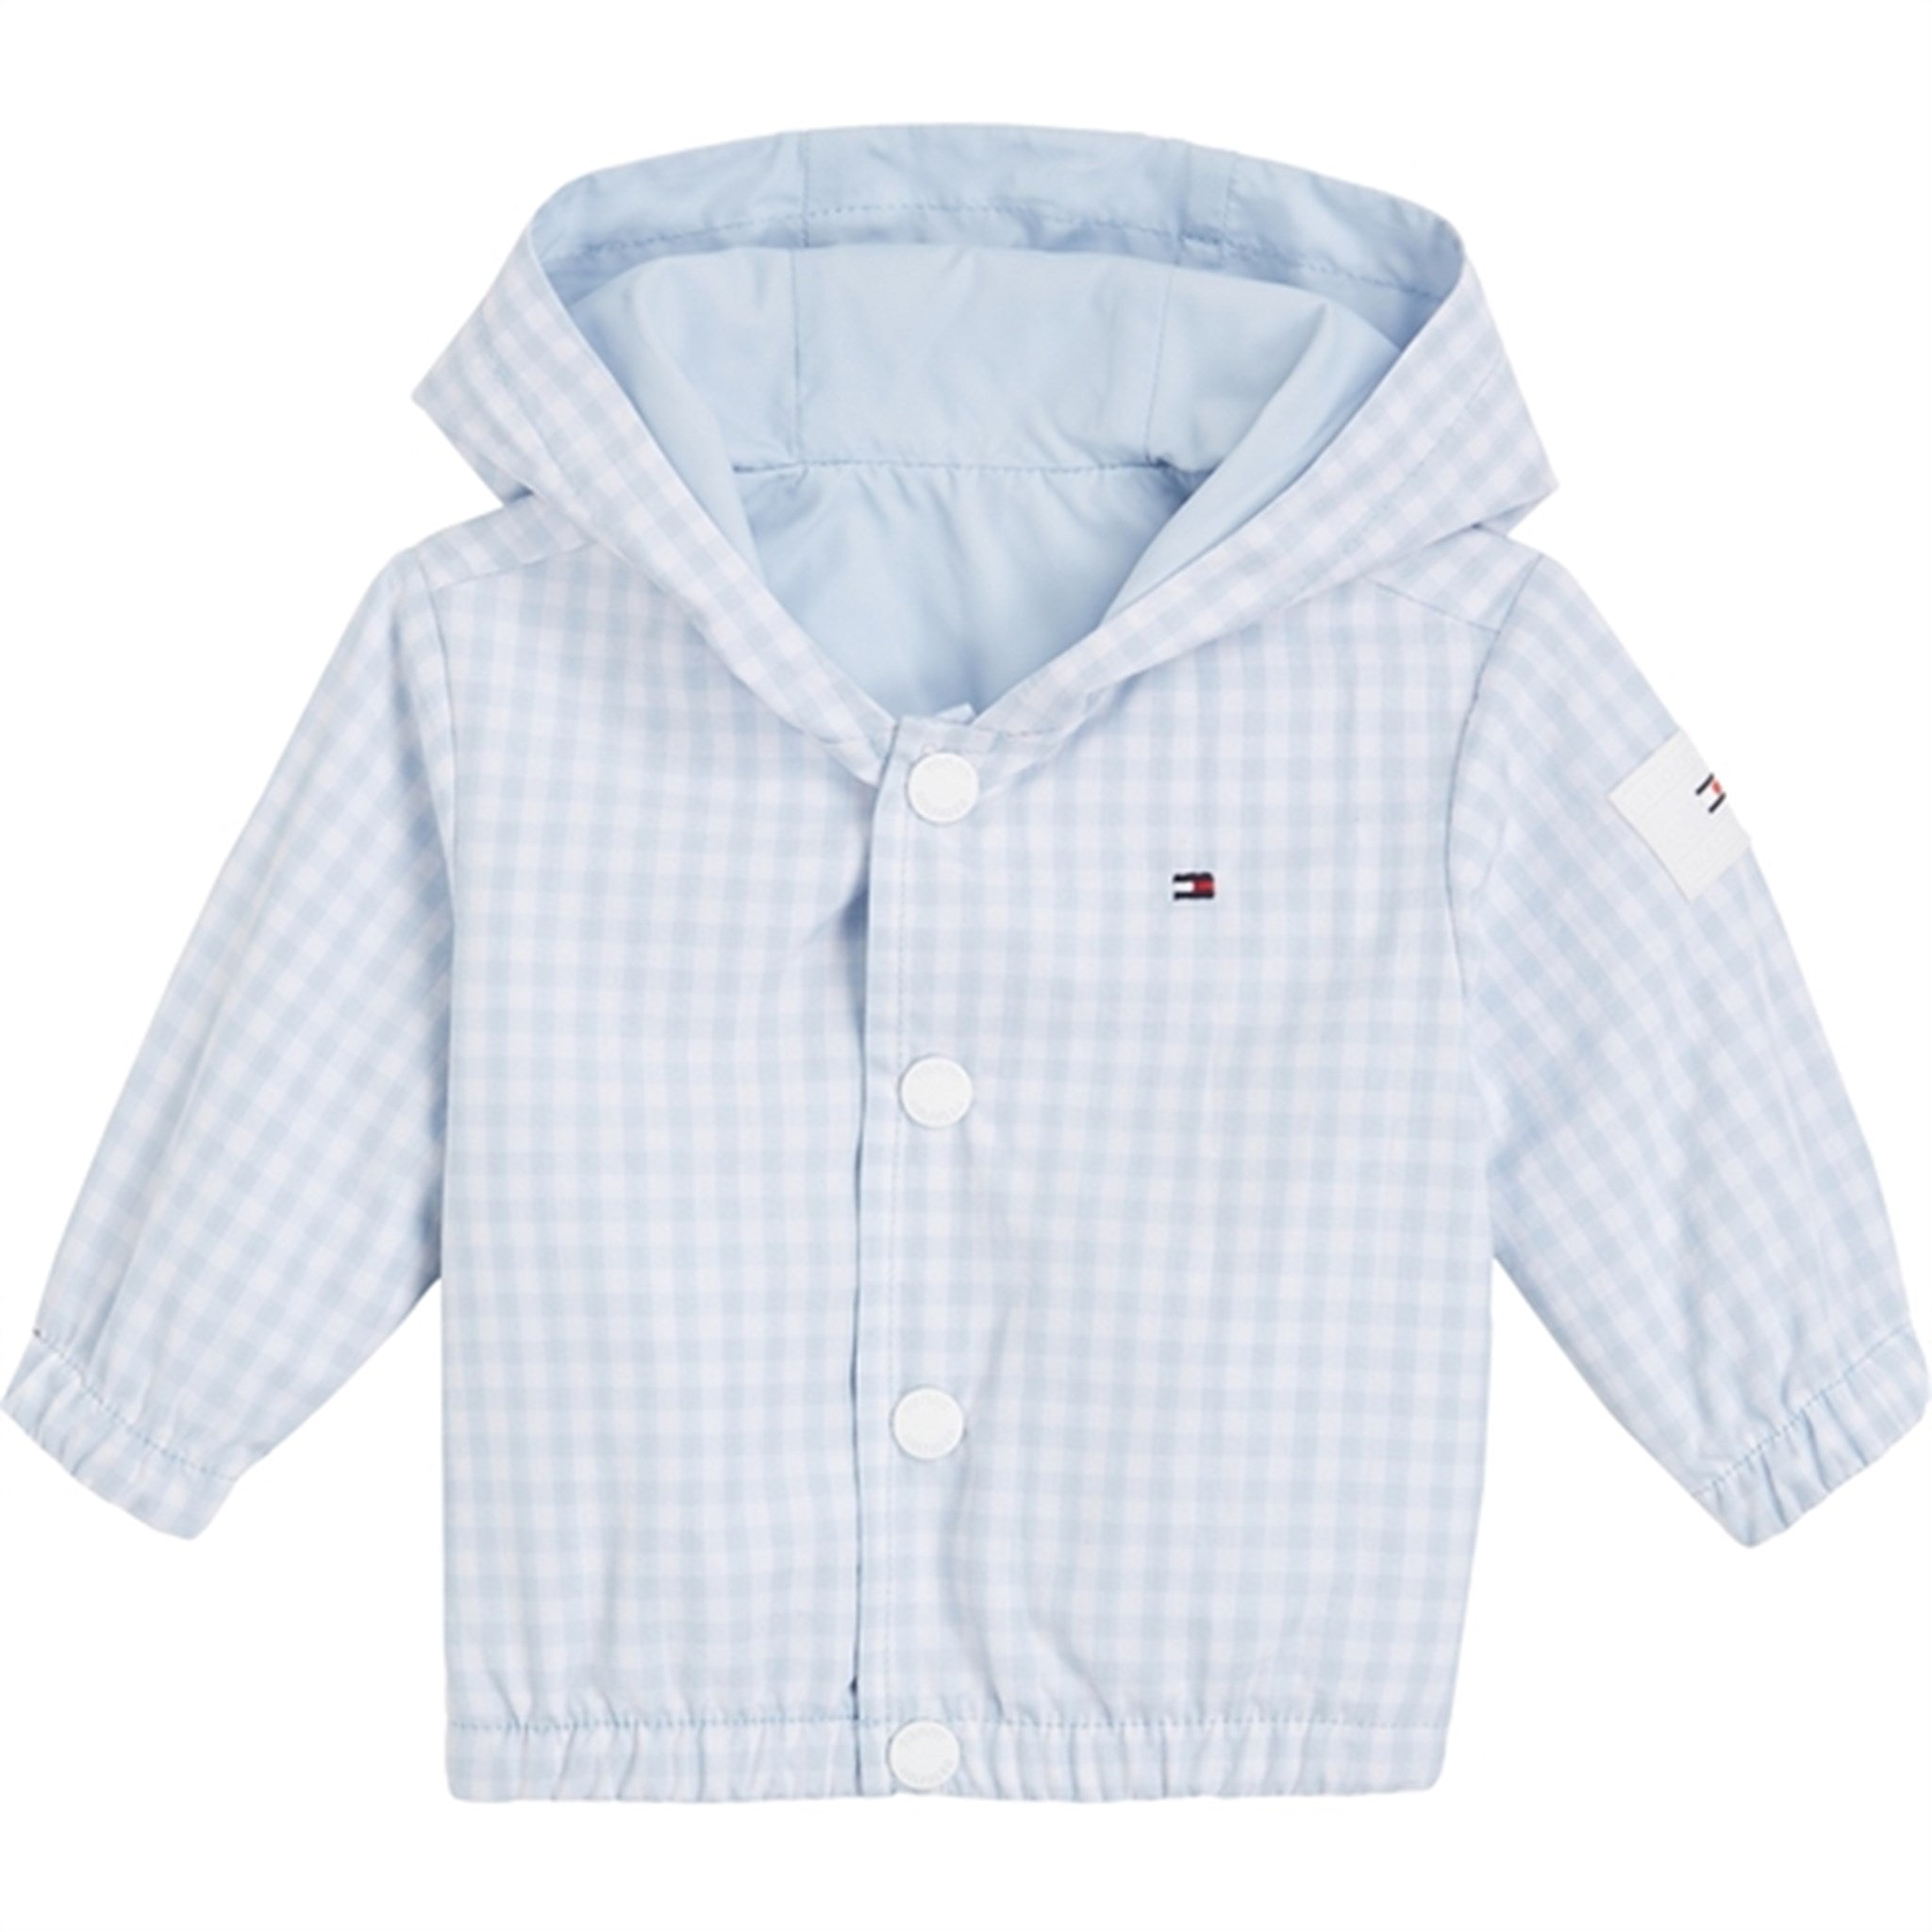 Tommy Hilfiger Baby Reversible Gingham Jacket White / Blue Check